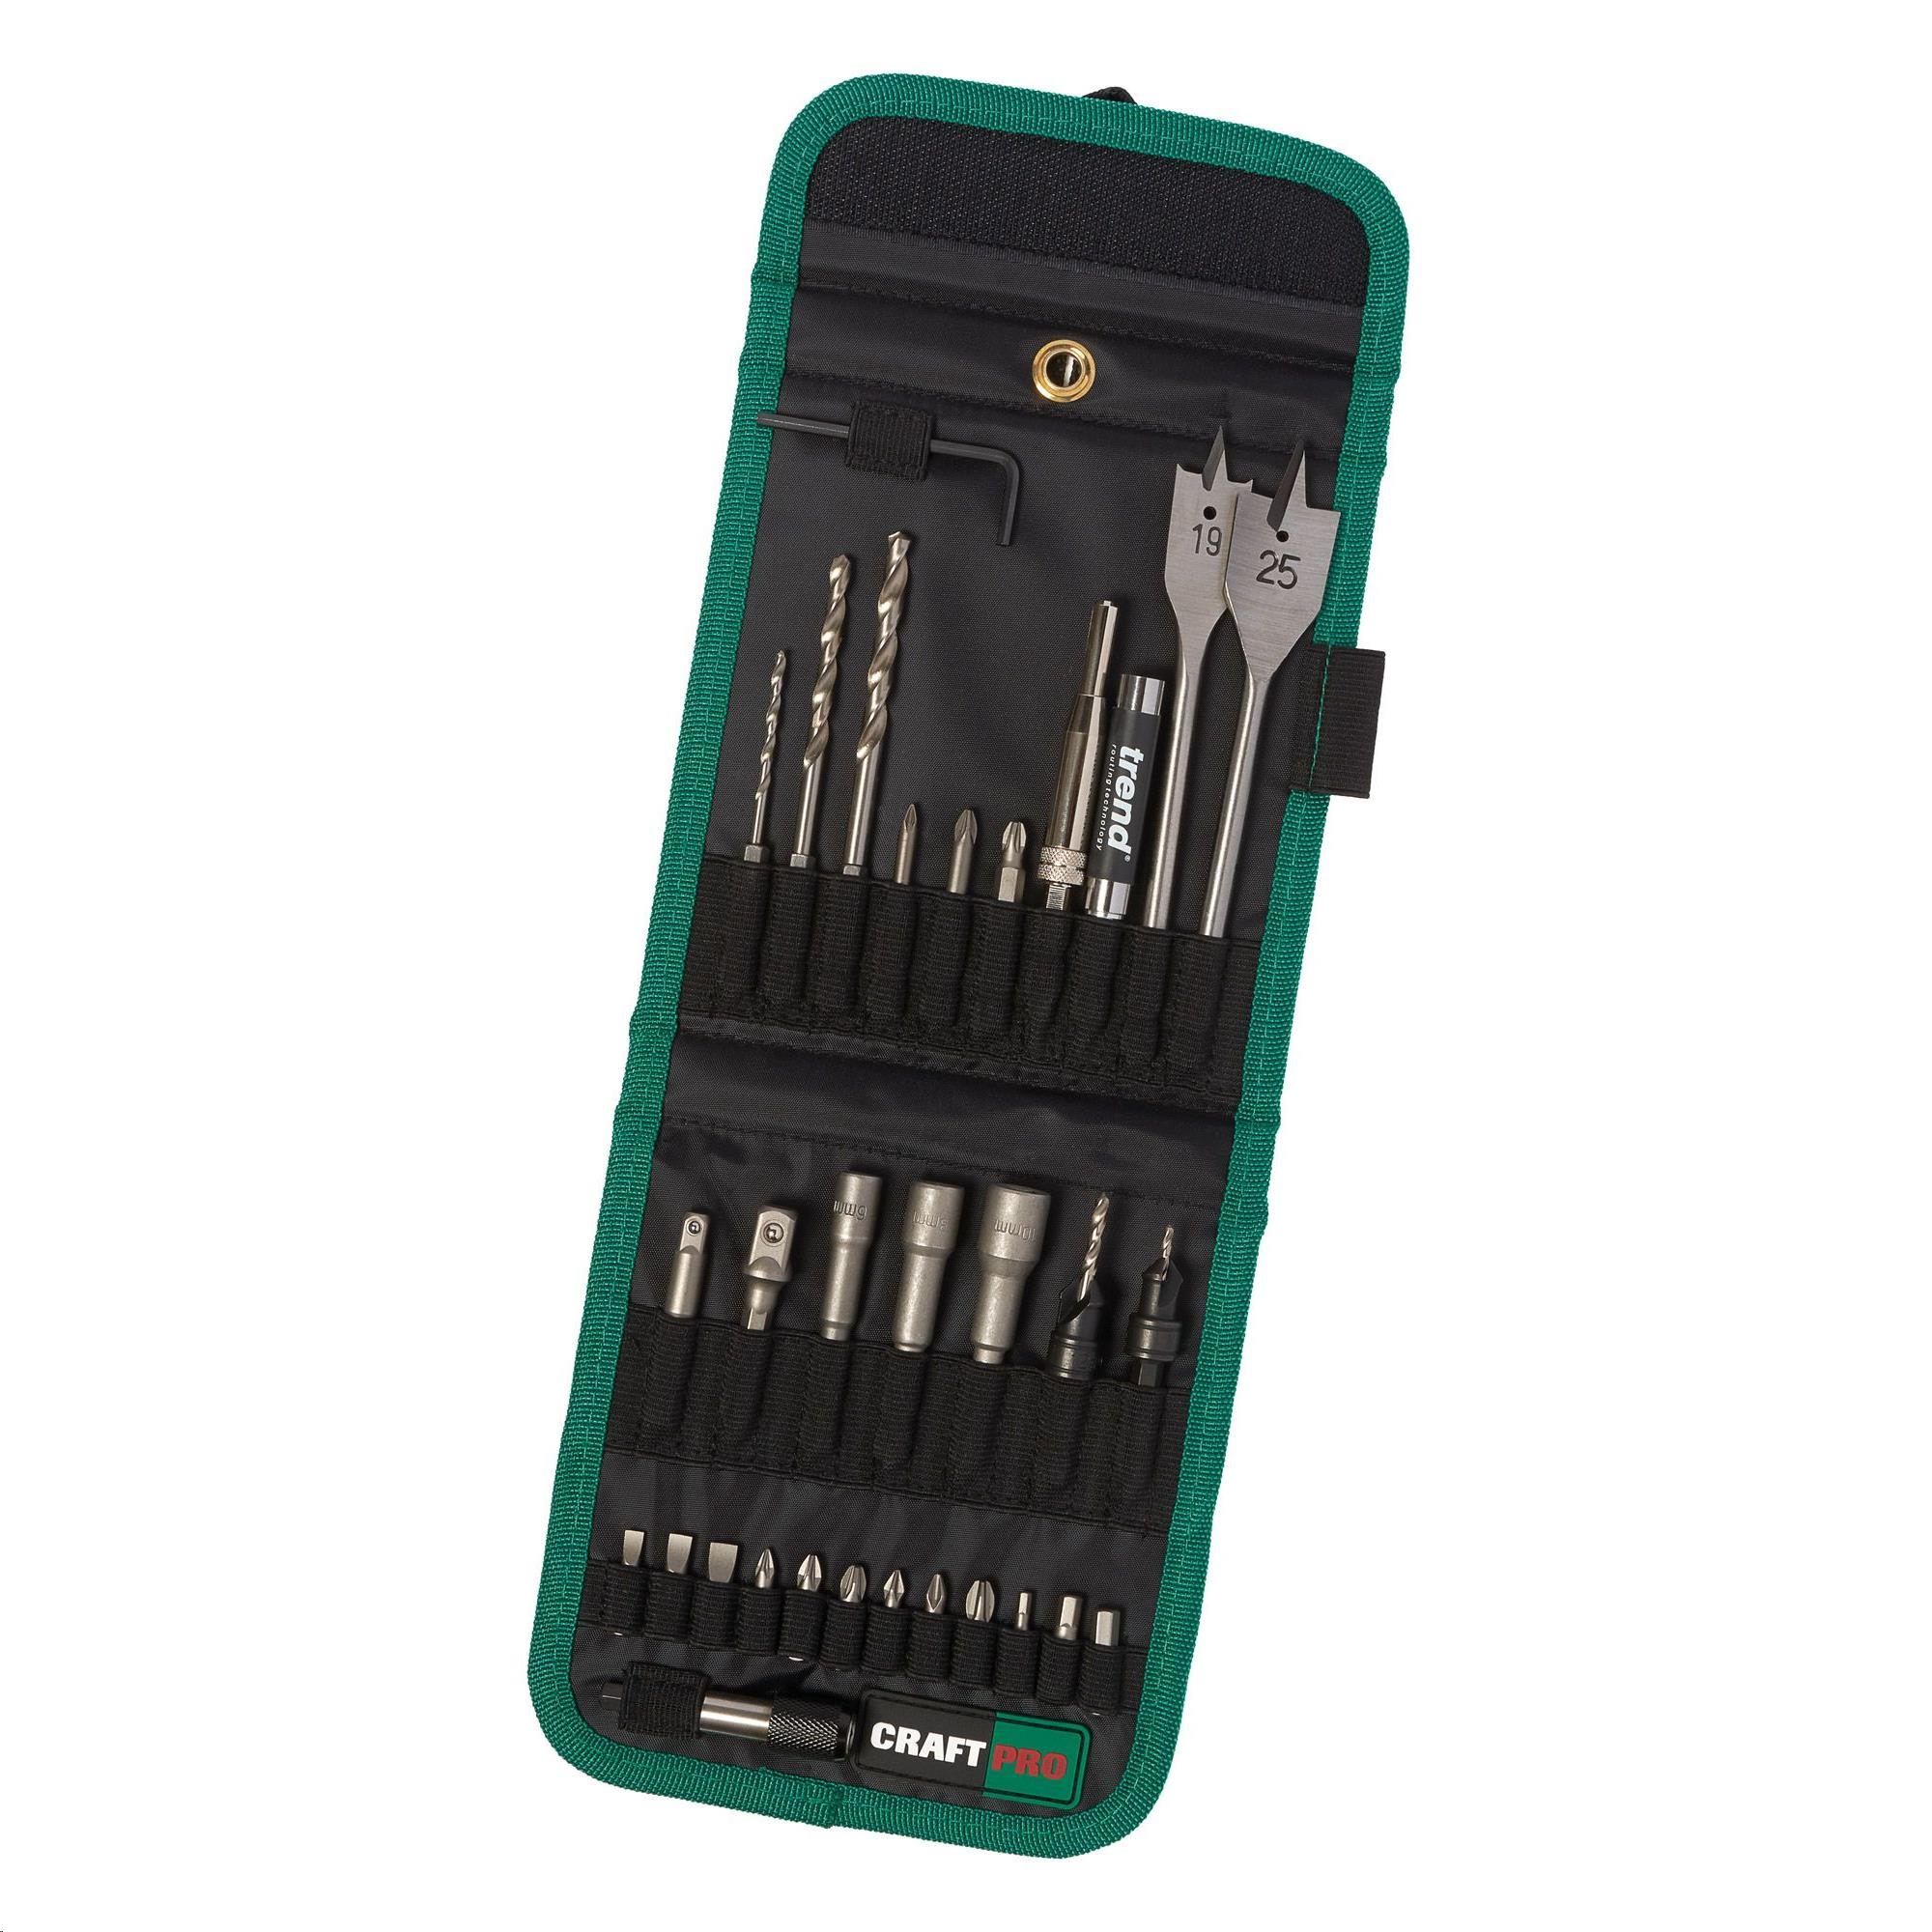 TREND CRAFT PRO QUICK RELEASE SET IN TOOL HOLDER (30PCS SET)